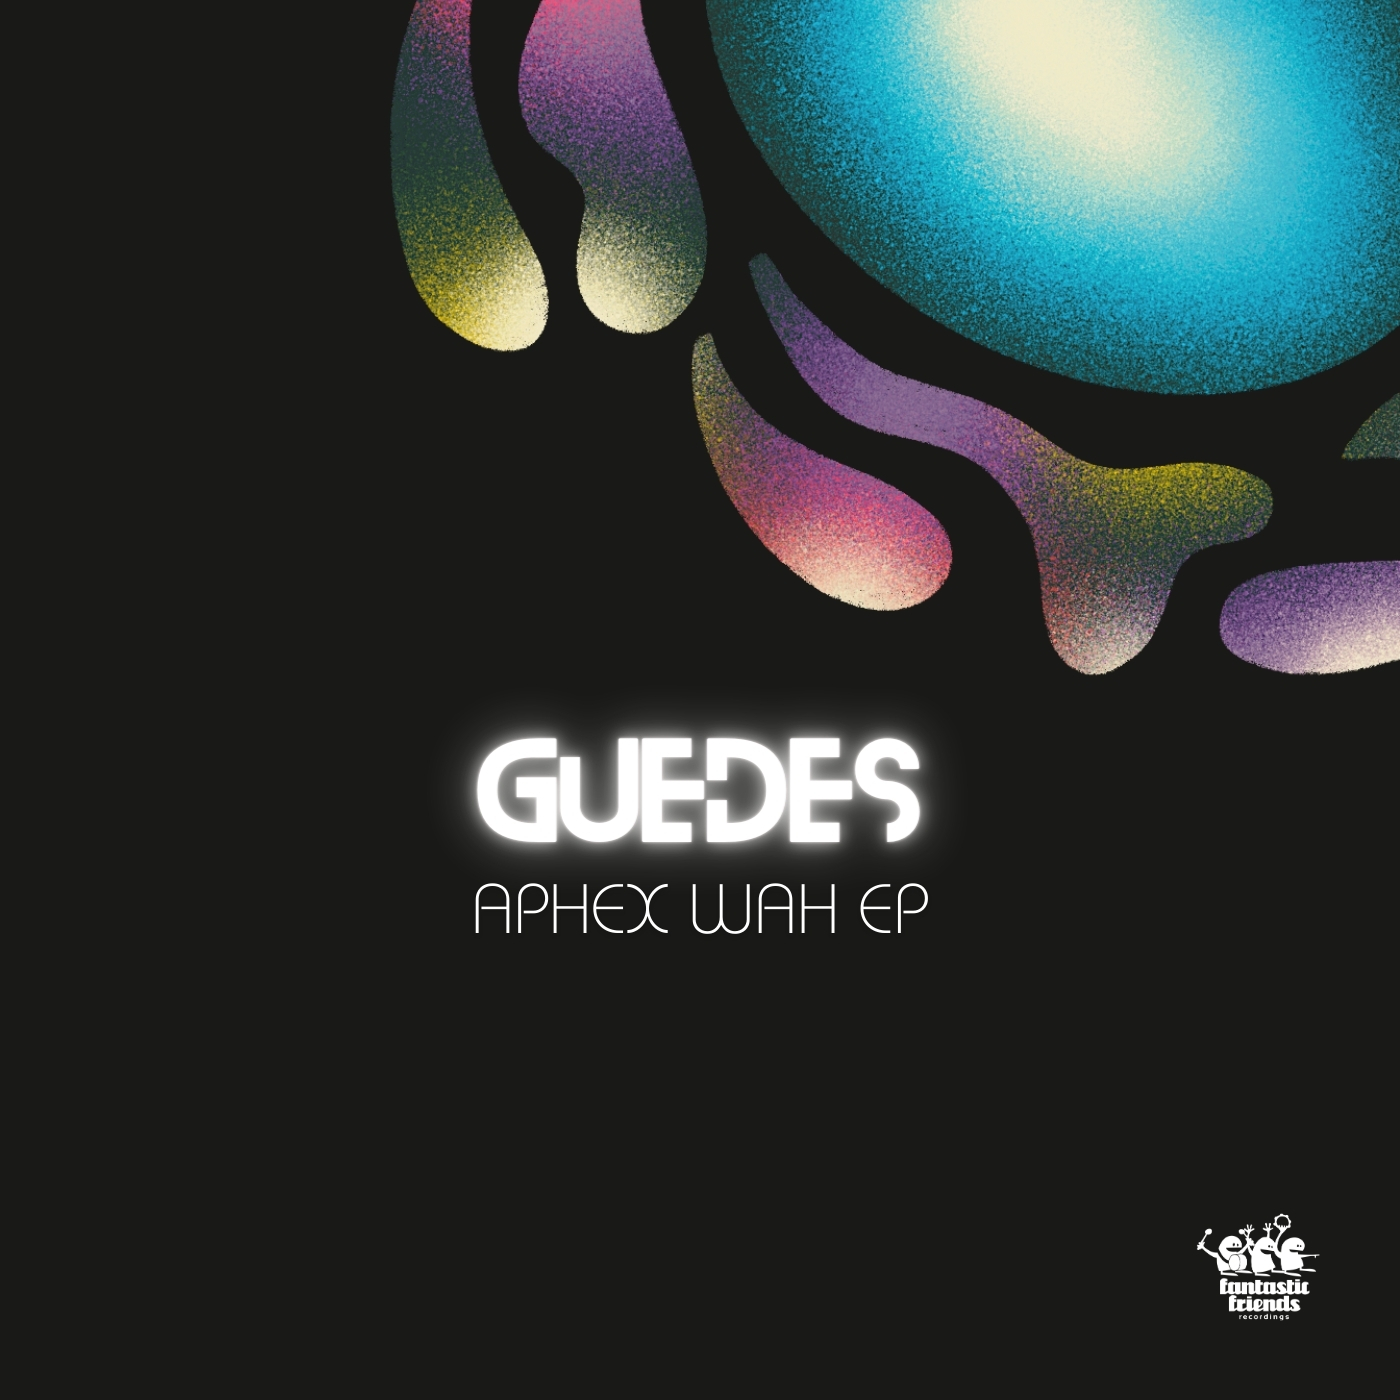 GUEDES – APHEX WAH EP